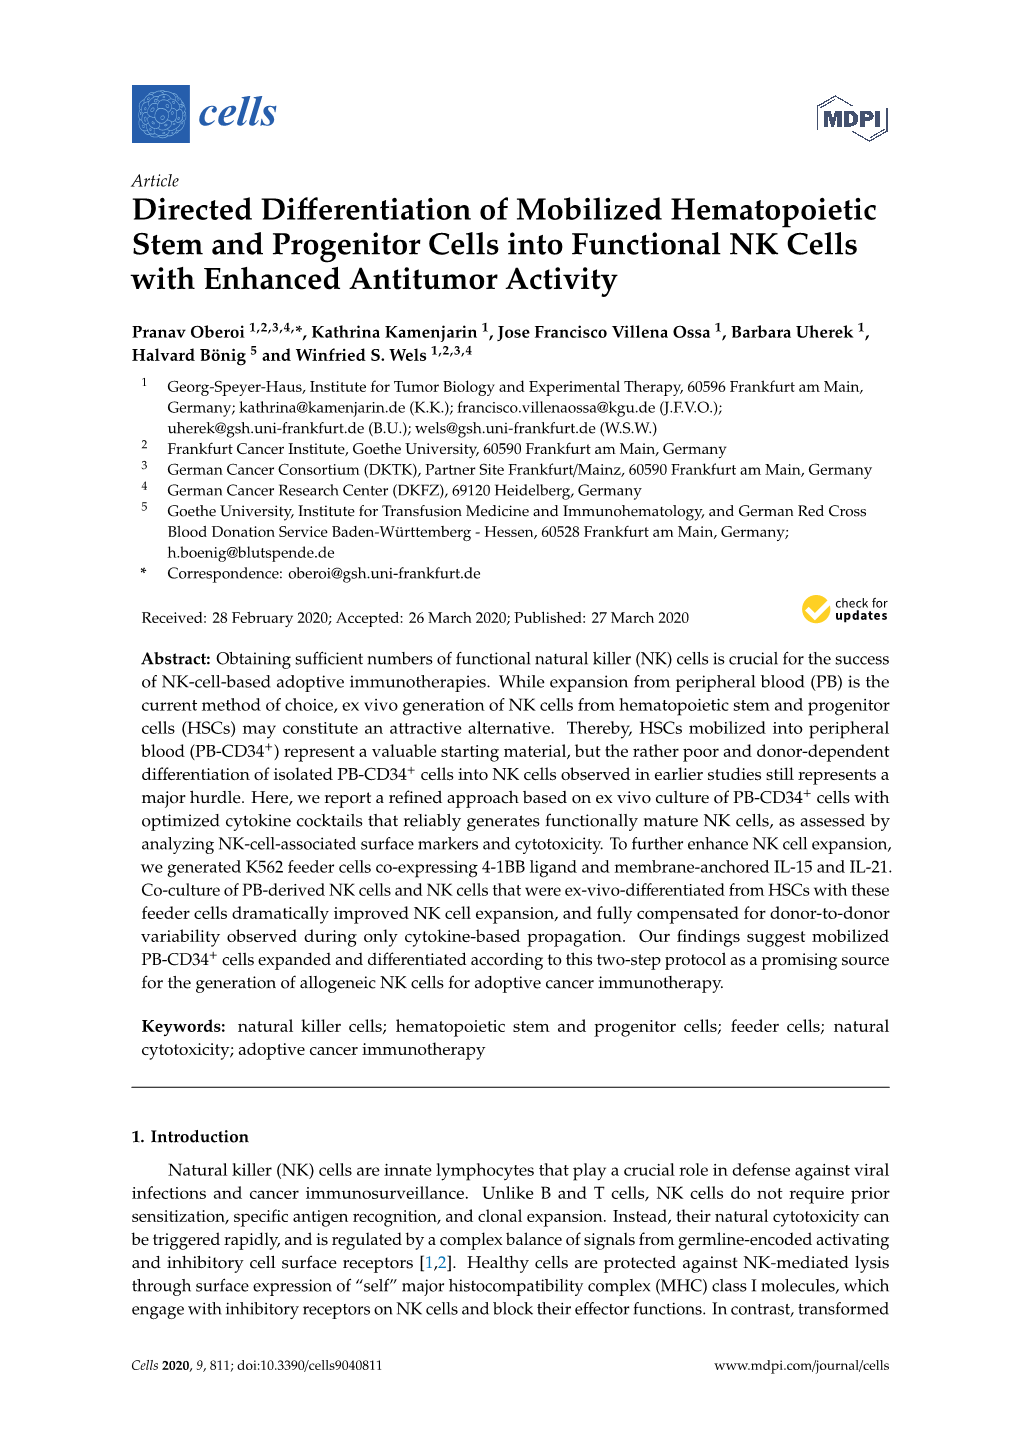 Directed Differentiation of Mobilized Hematopoietic Stem and Progenitor